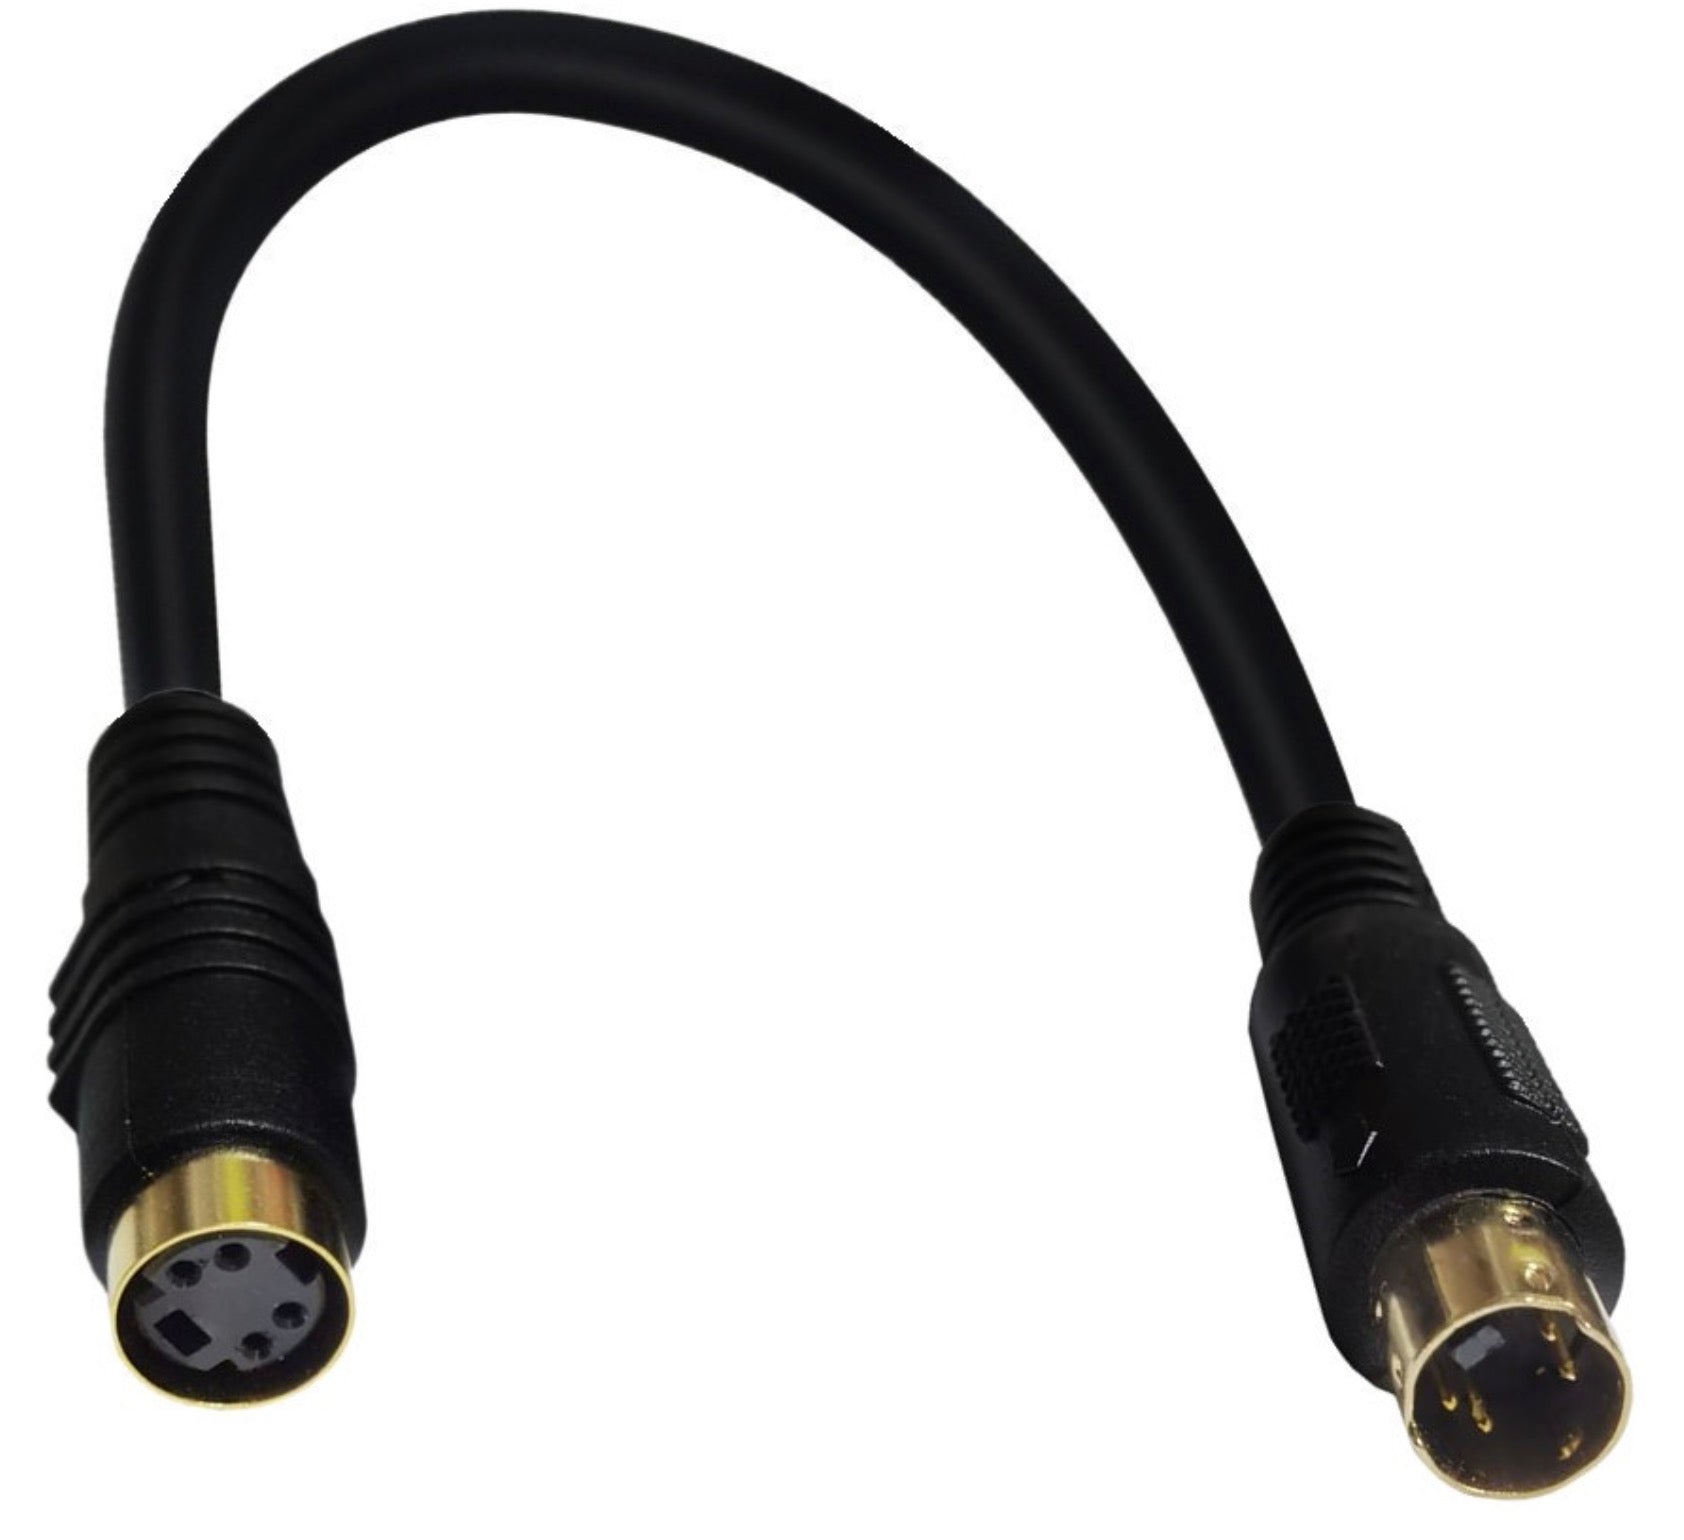 S-Video 4 Pin Male to Female Audio Cable For Home Theater, DSS receivers, VCRs, DVRs/PVRs, Camcorders, DVD Players.